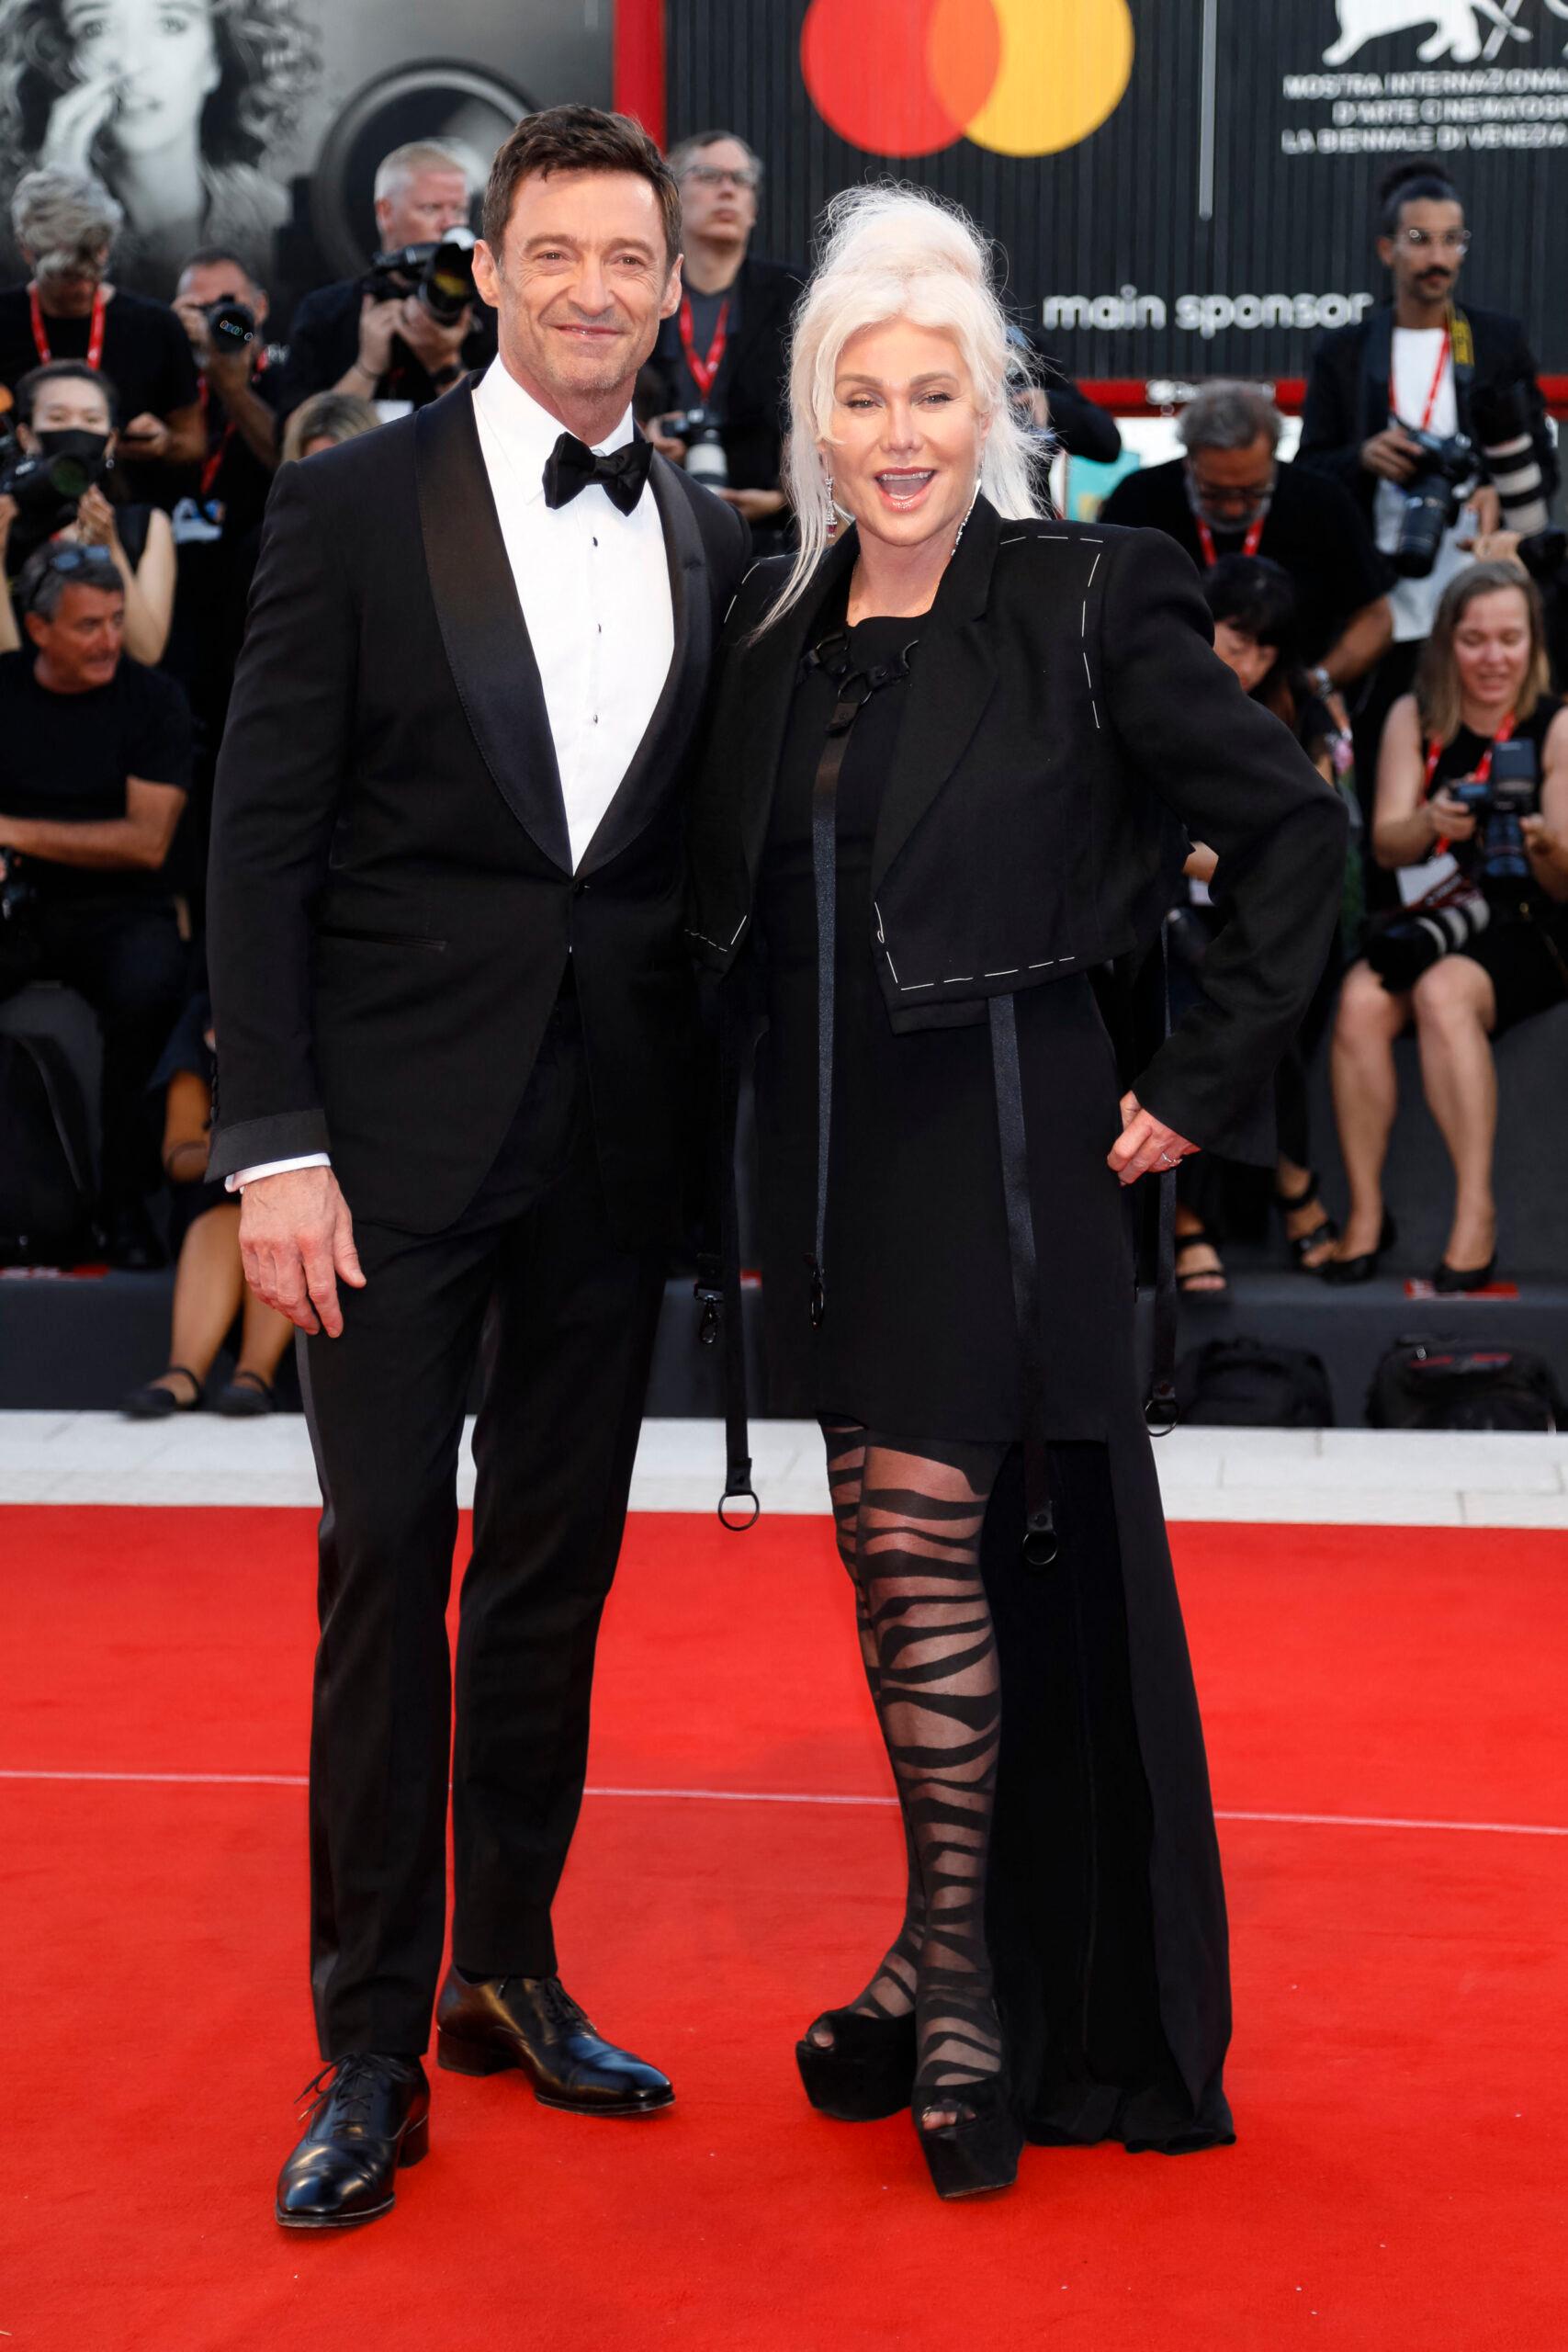 Hugh Jackman and Deborra-Lee Furness attend the premiere of 'The Son' during the 79th Venice International Film Festival at Palazzo del Cinema